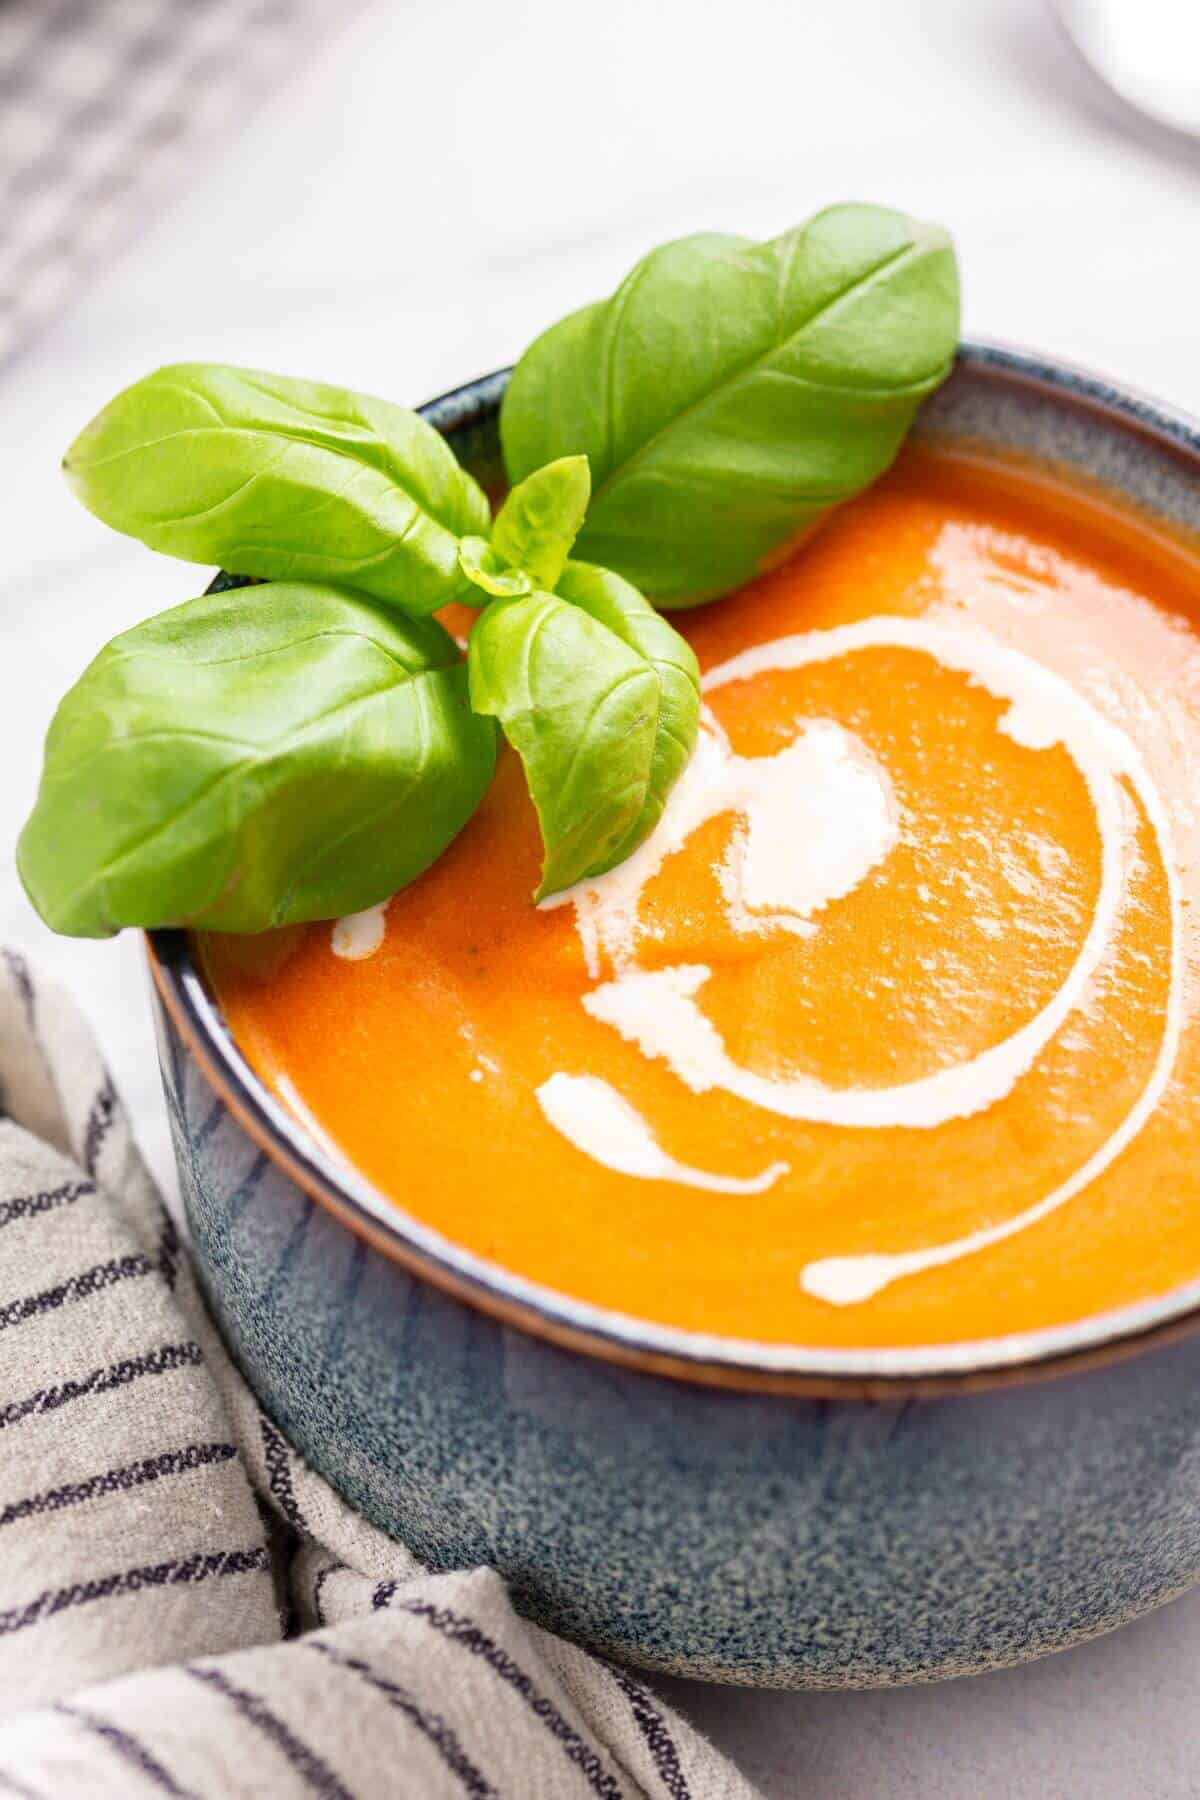 A bowl of creamy tomato soup garnished with fresh basil leaves.